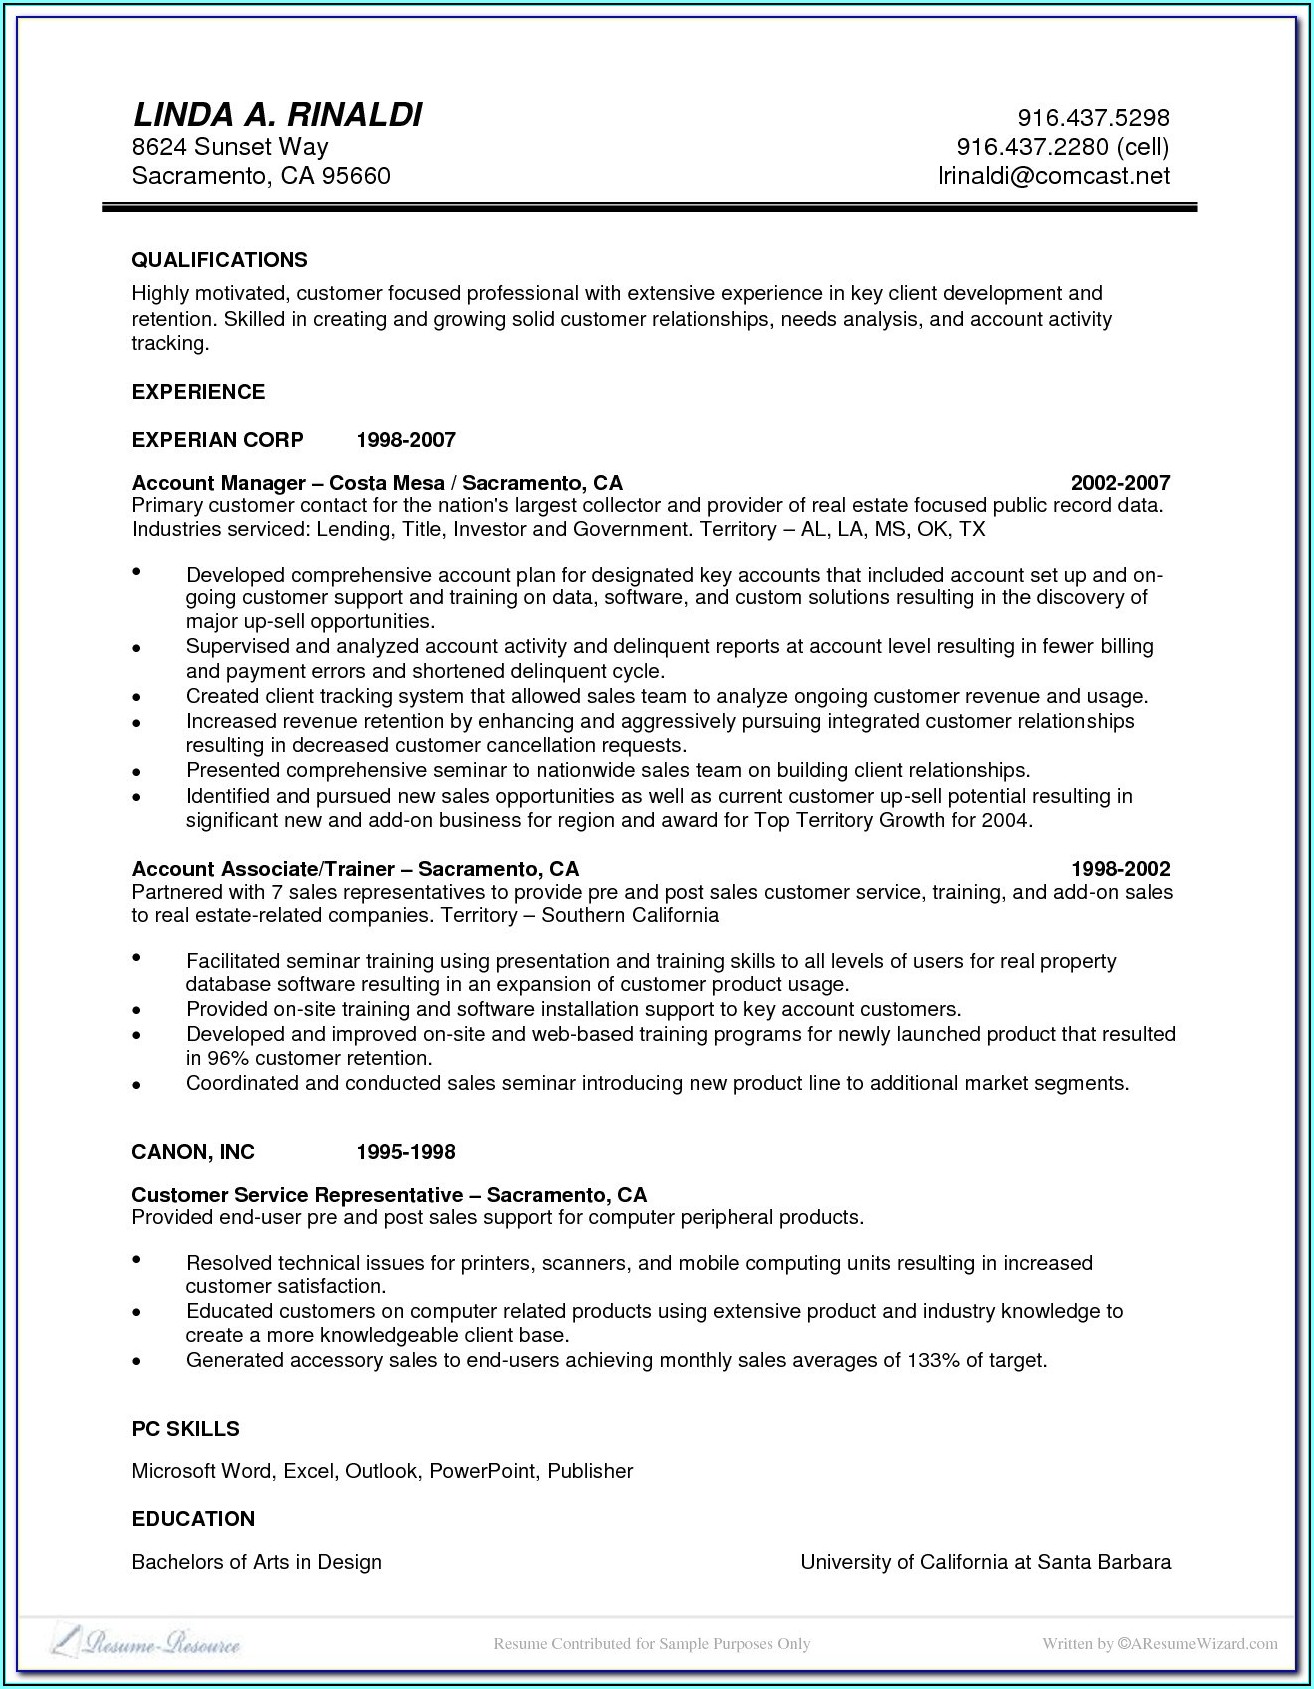 Resume Format For Hr Executive Doc